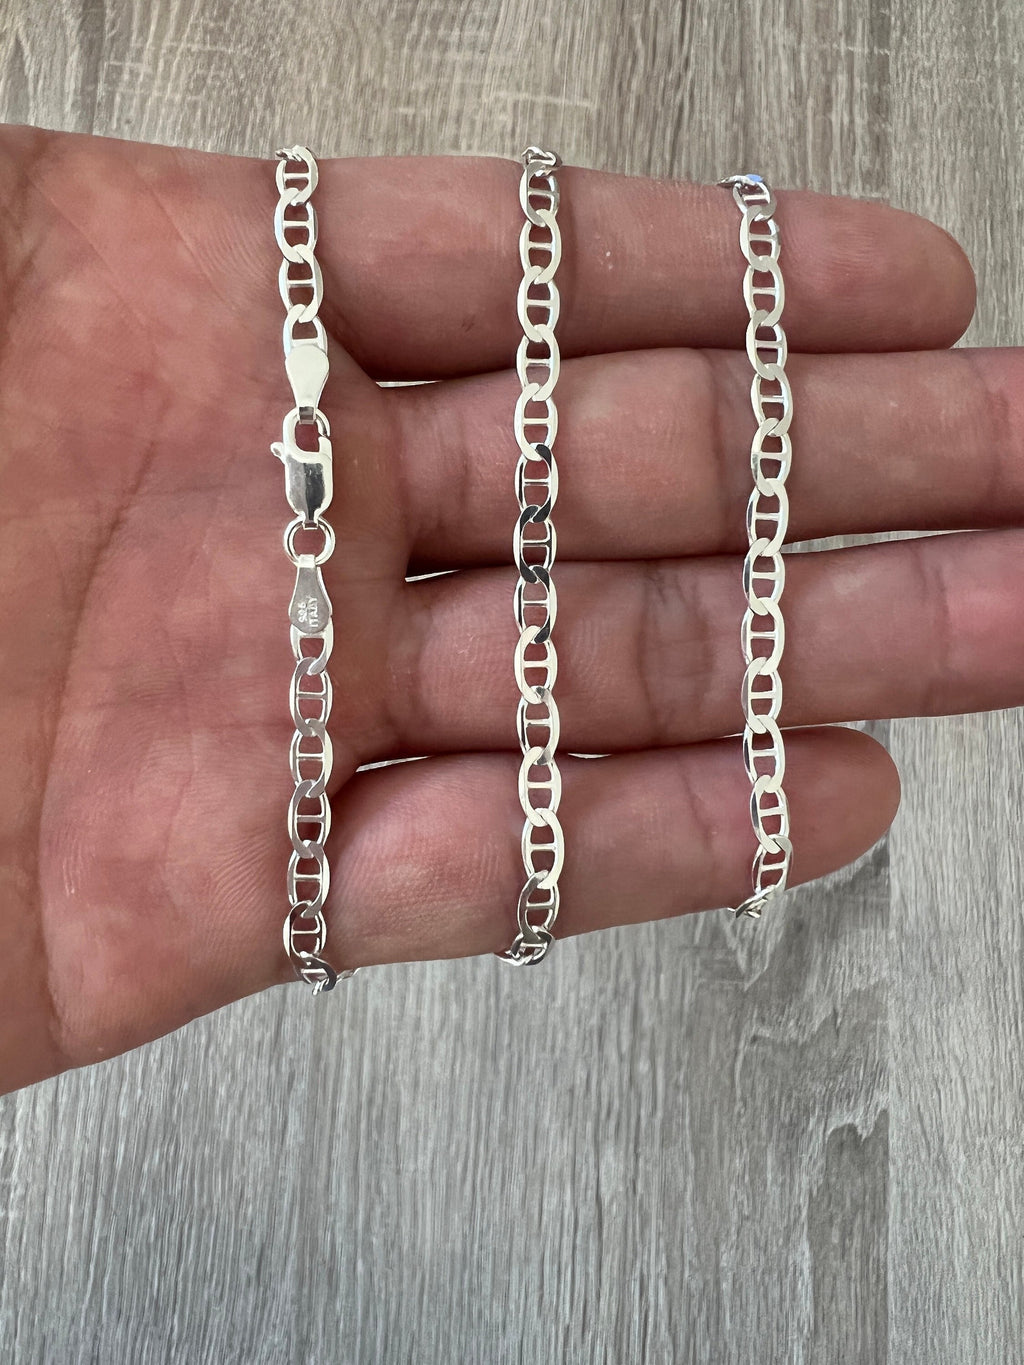 8mm 925 Mariner Sterling Silver Solid Chain Necklace Diamond Cut